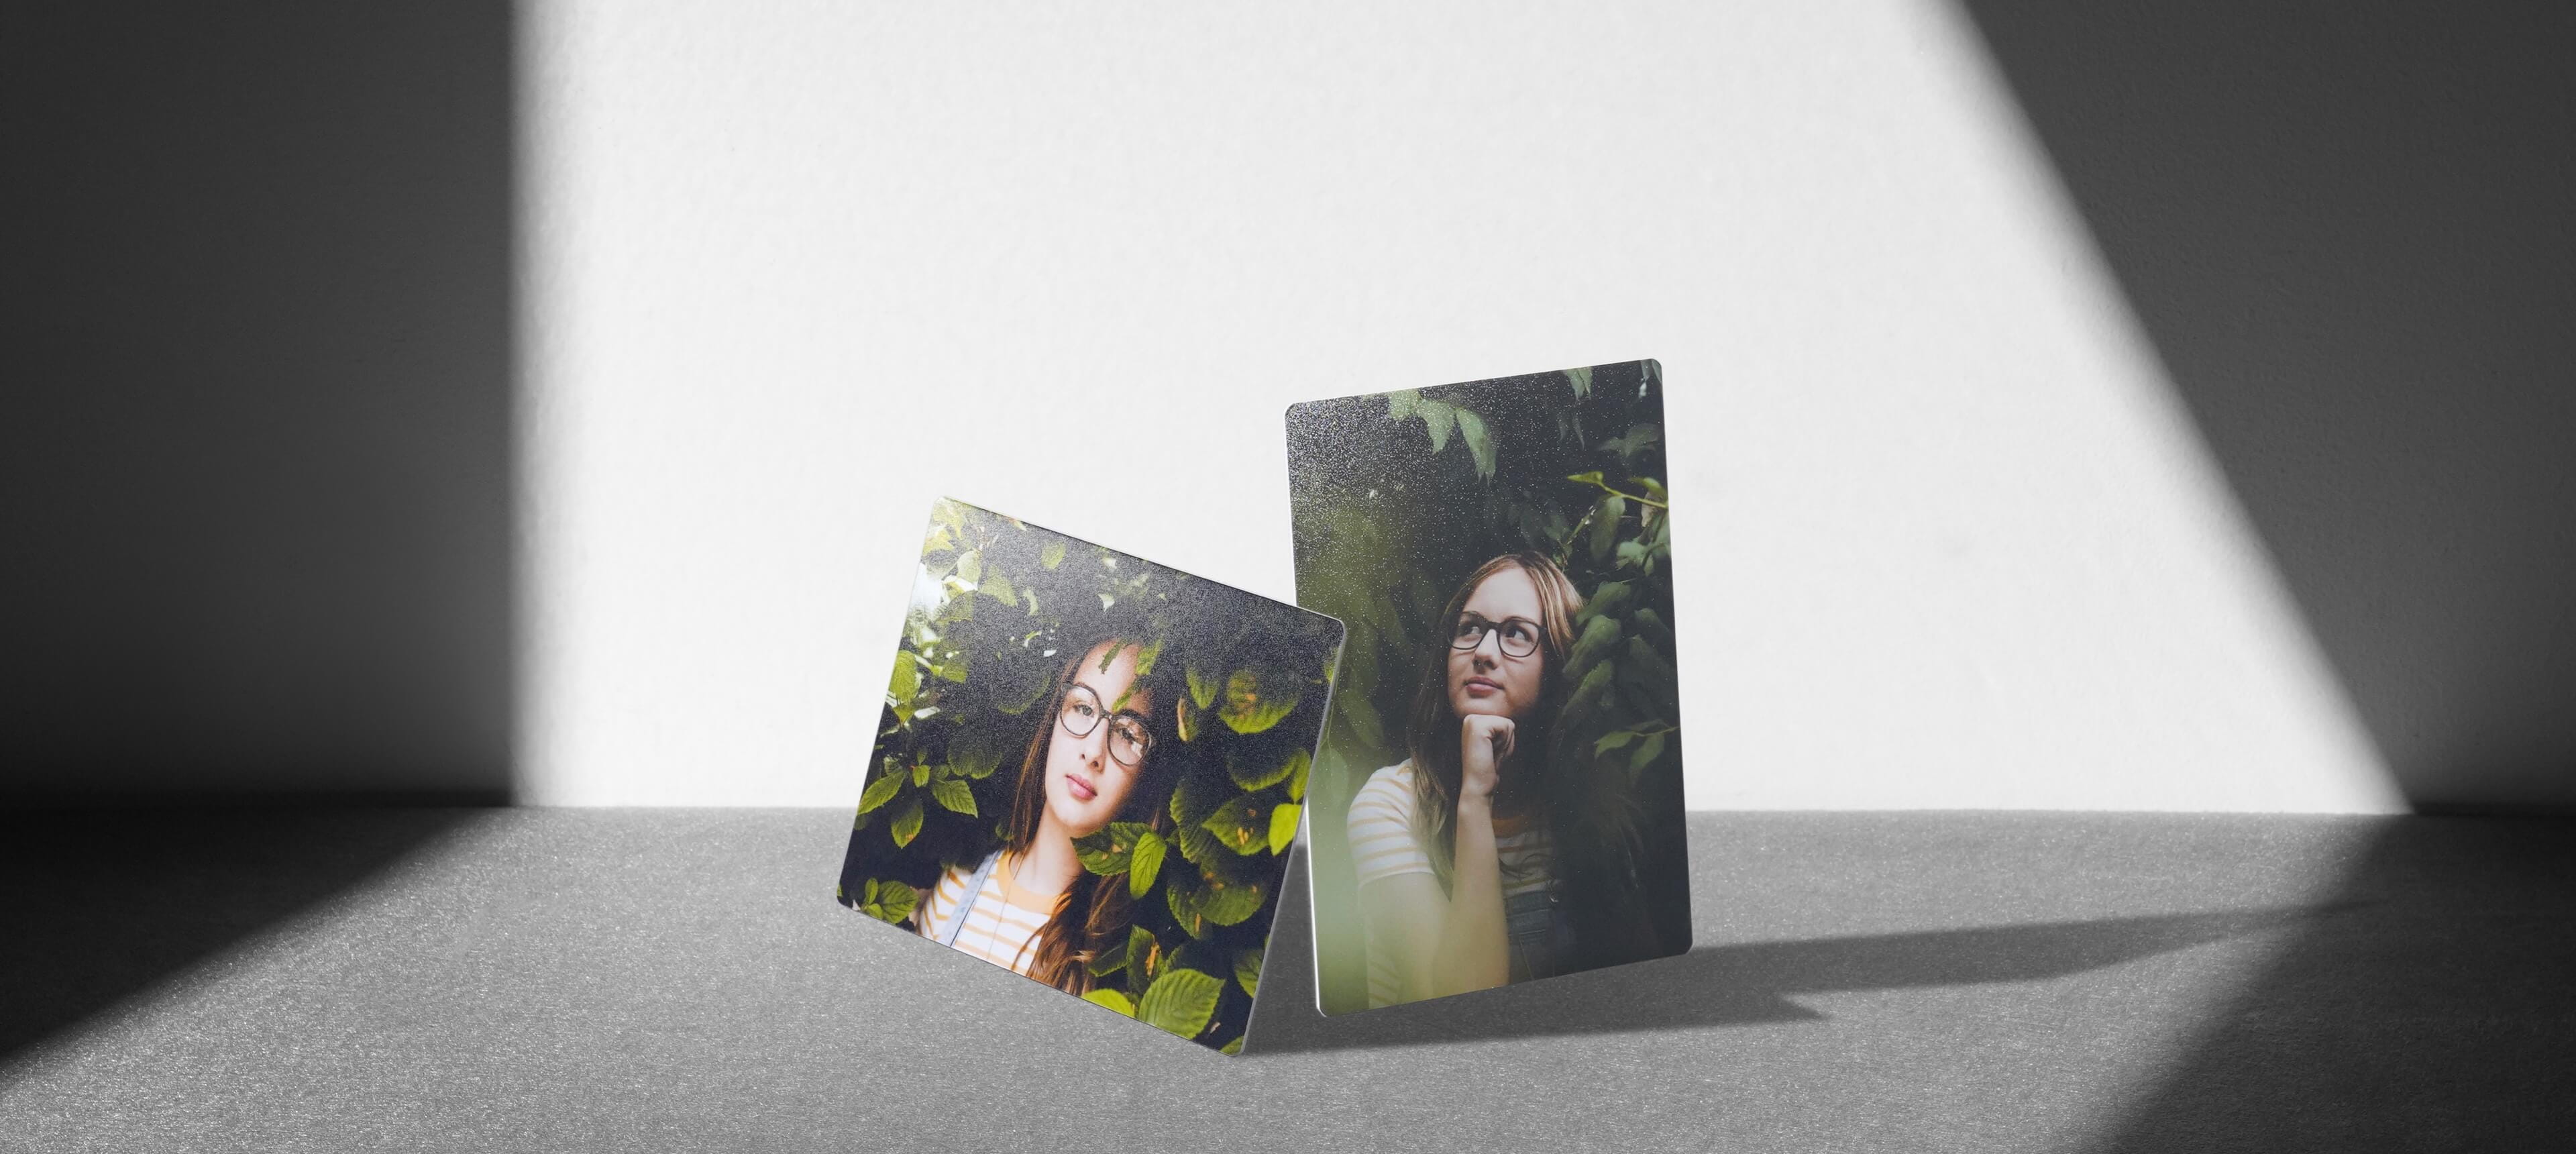 two prints lean on each other on grey table showing a woman in front of vegetation